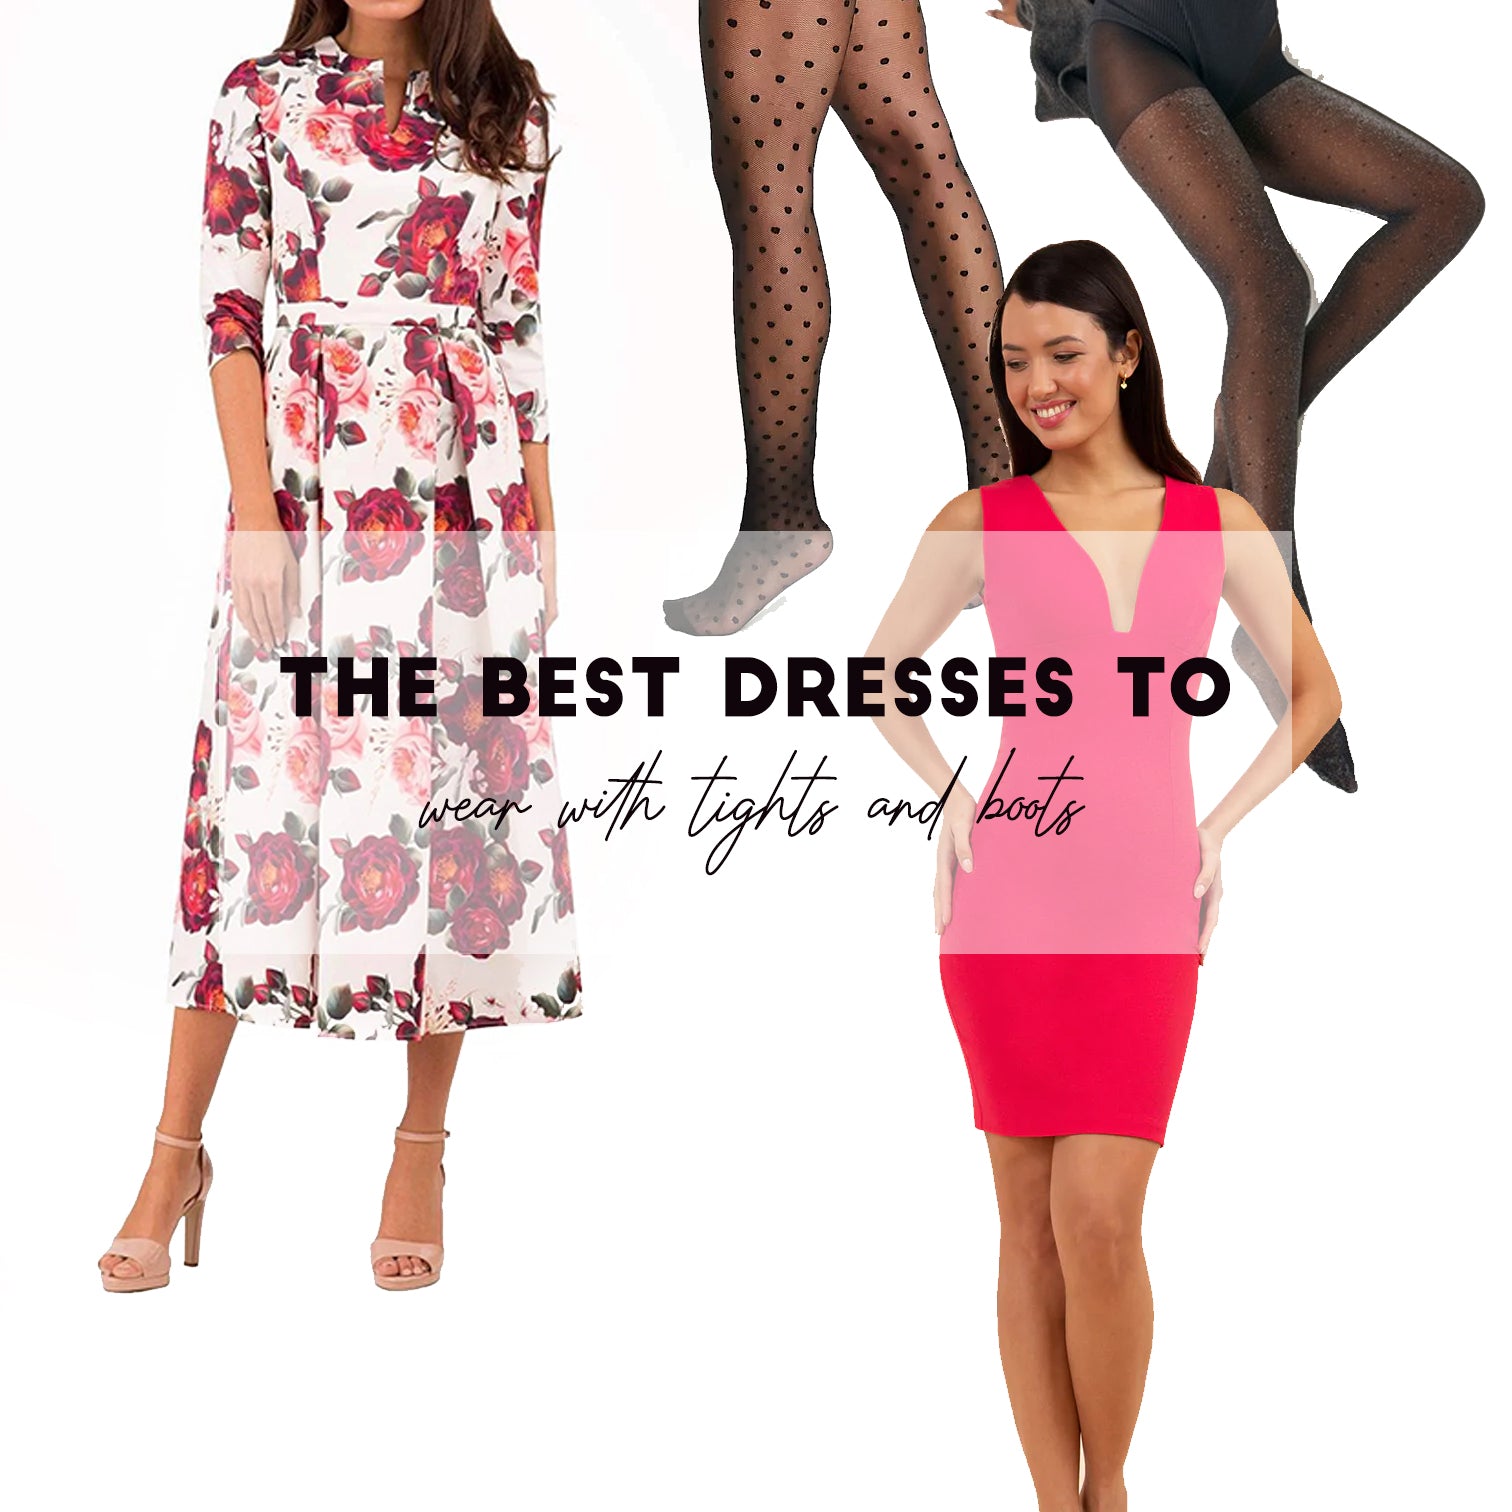 How to wear tights with dresses and boots